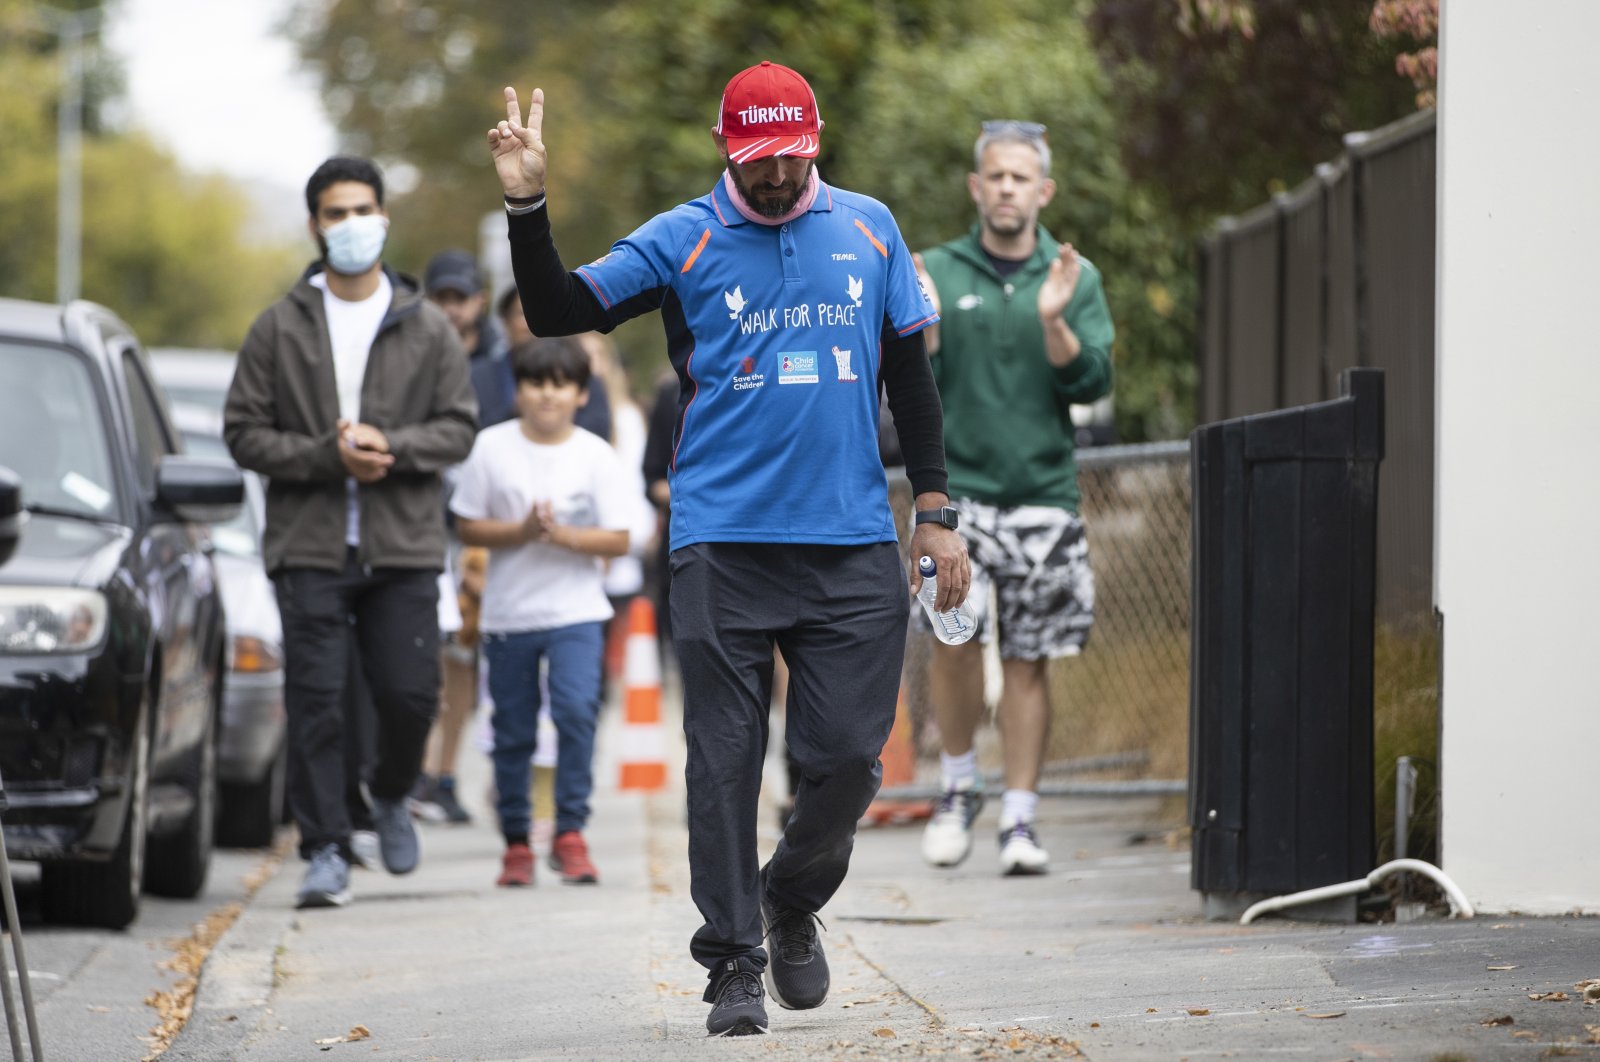 Temel Ataçocuğu gestures as he completes his walk, in Christchurch, New Zealand, March 15, 2022. (AP PHOTO)